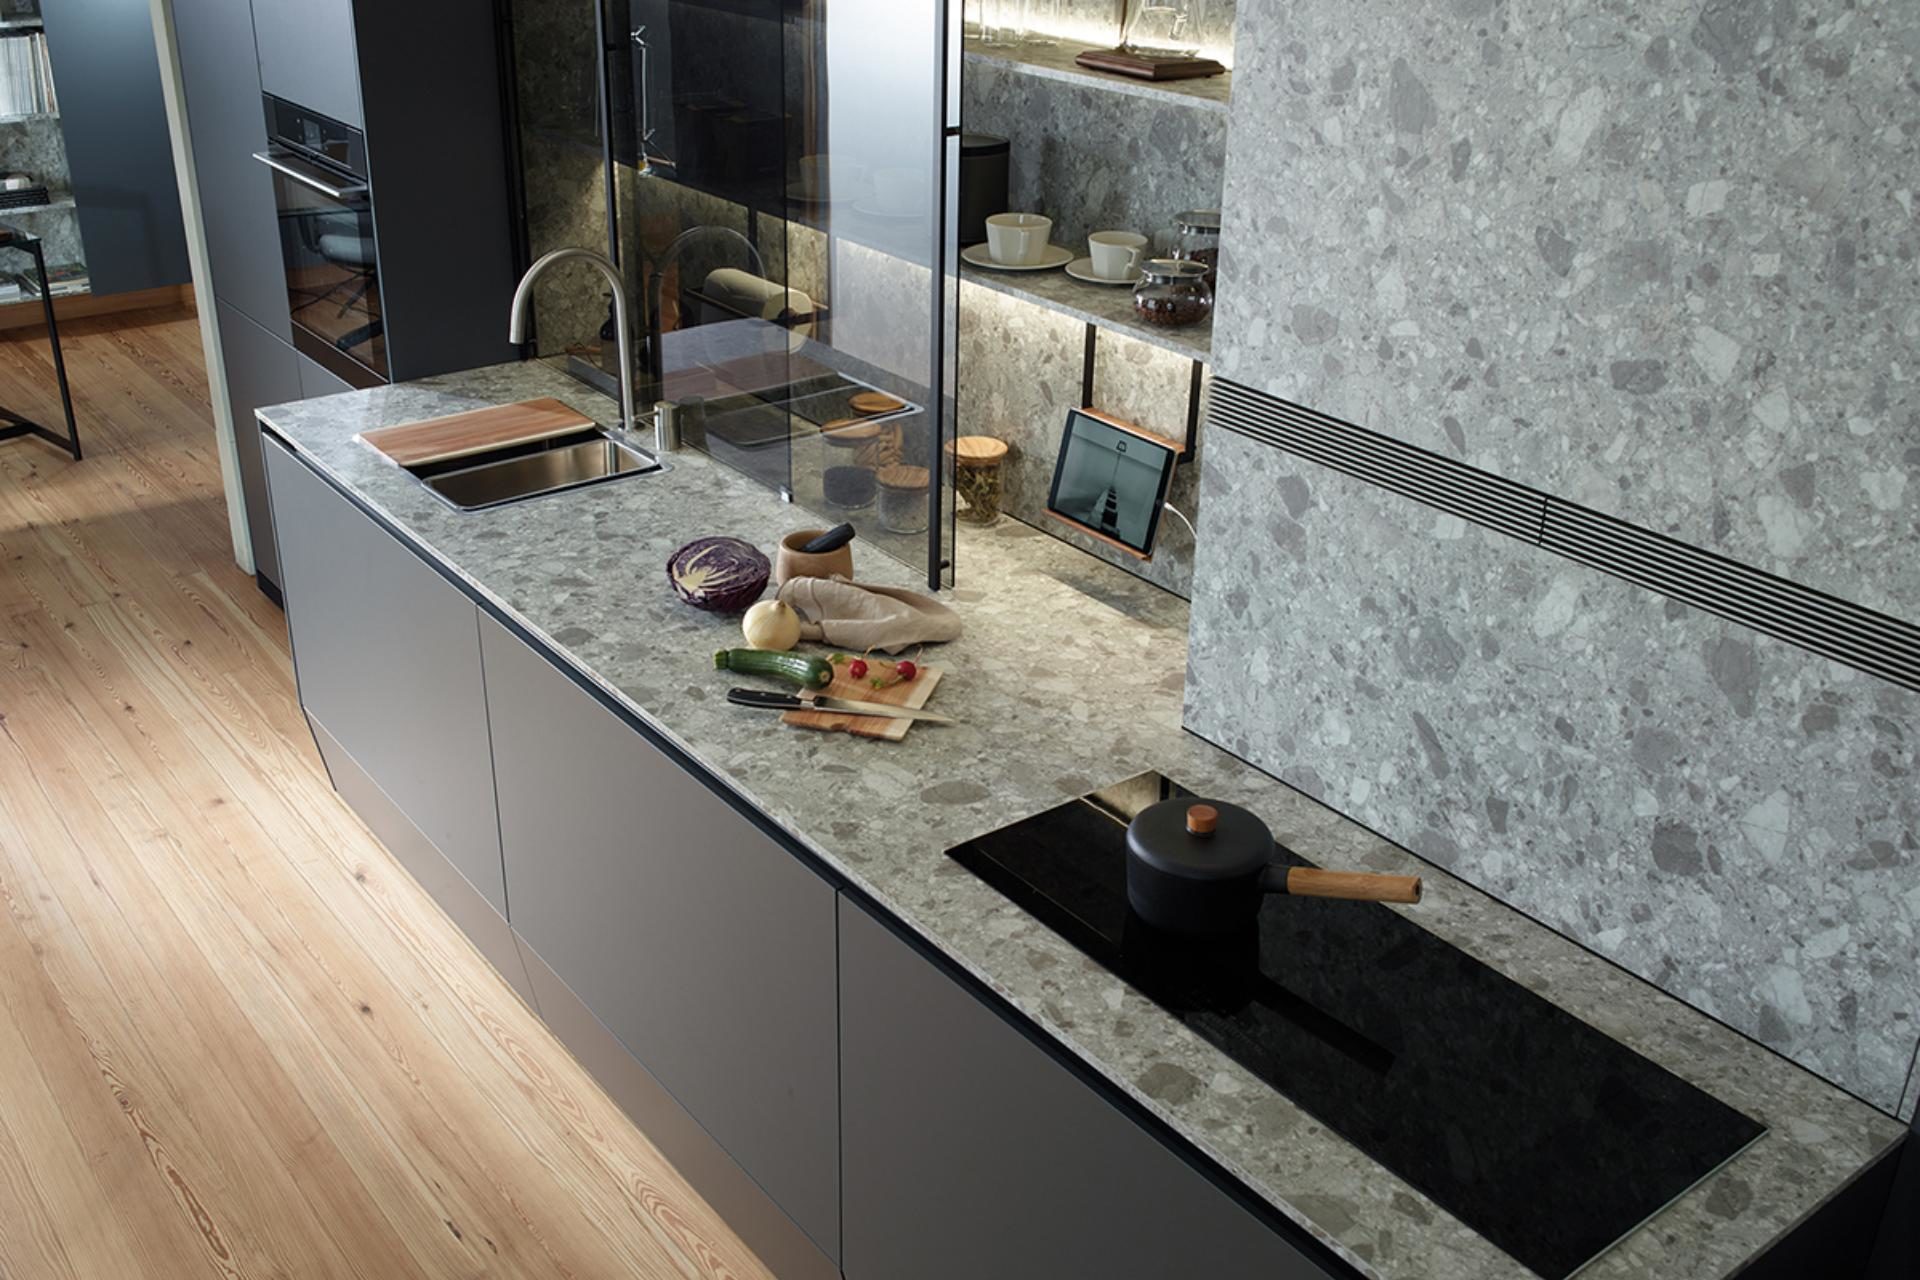 Kitchen units with black front and grey marble credence and worktop